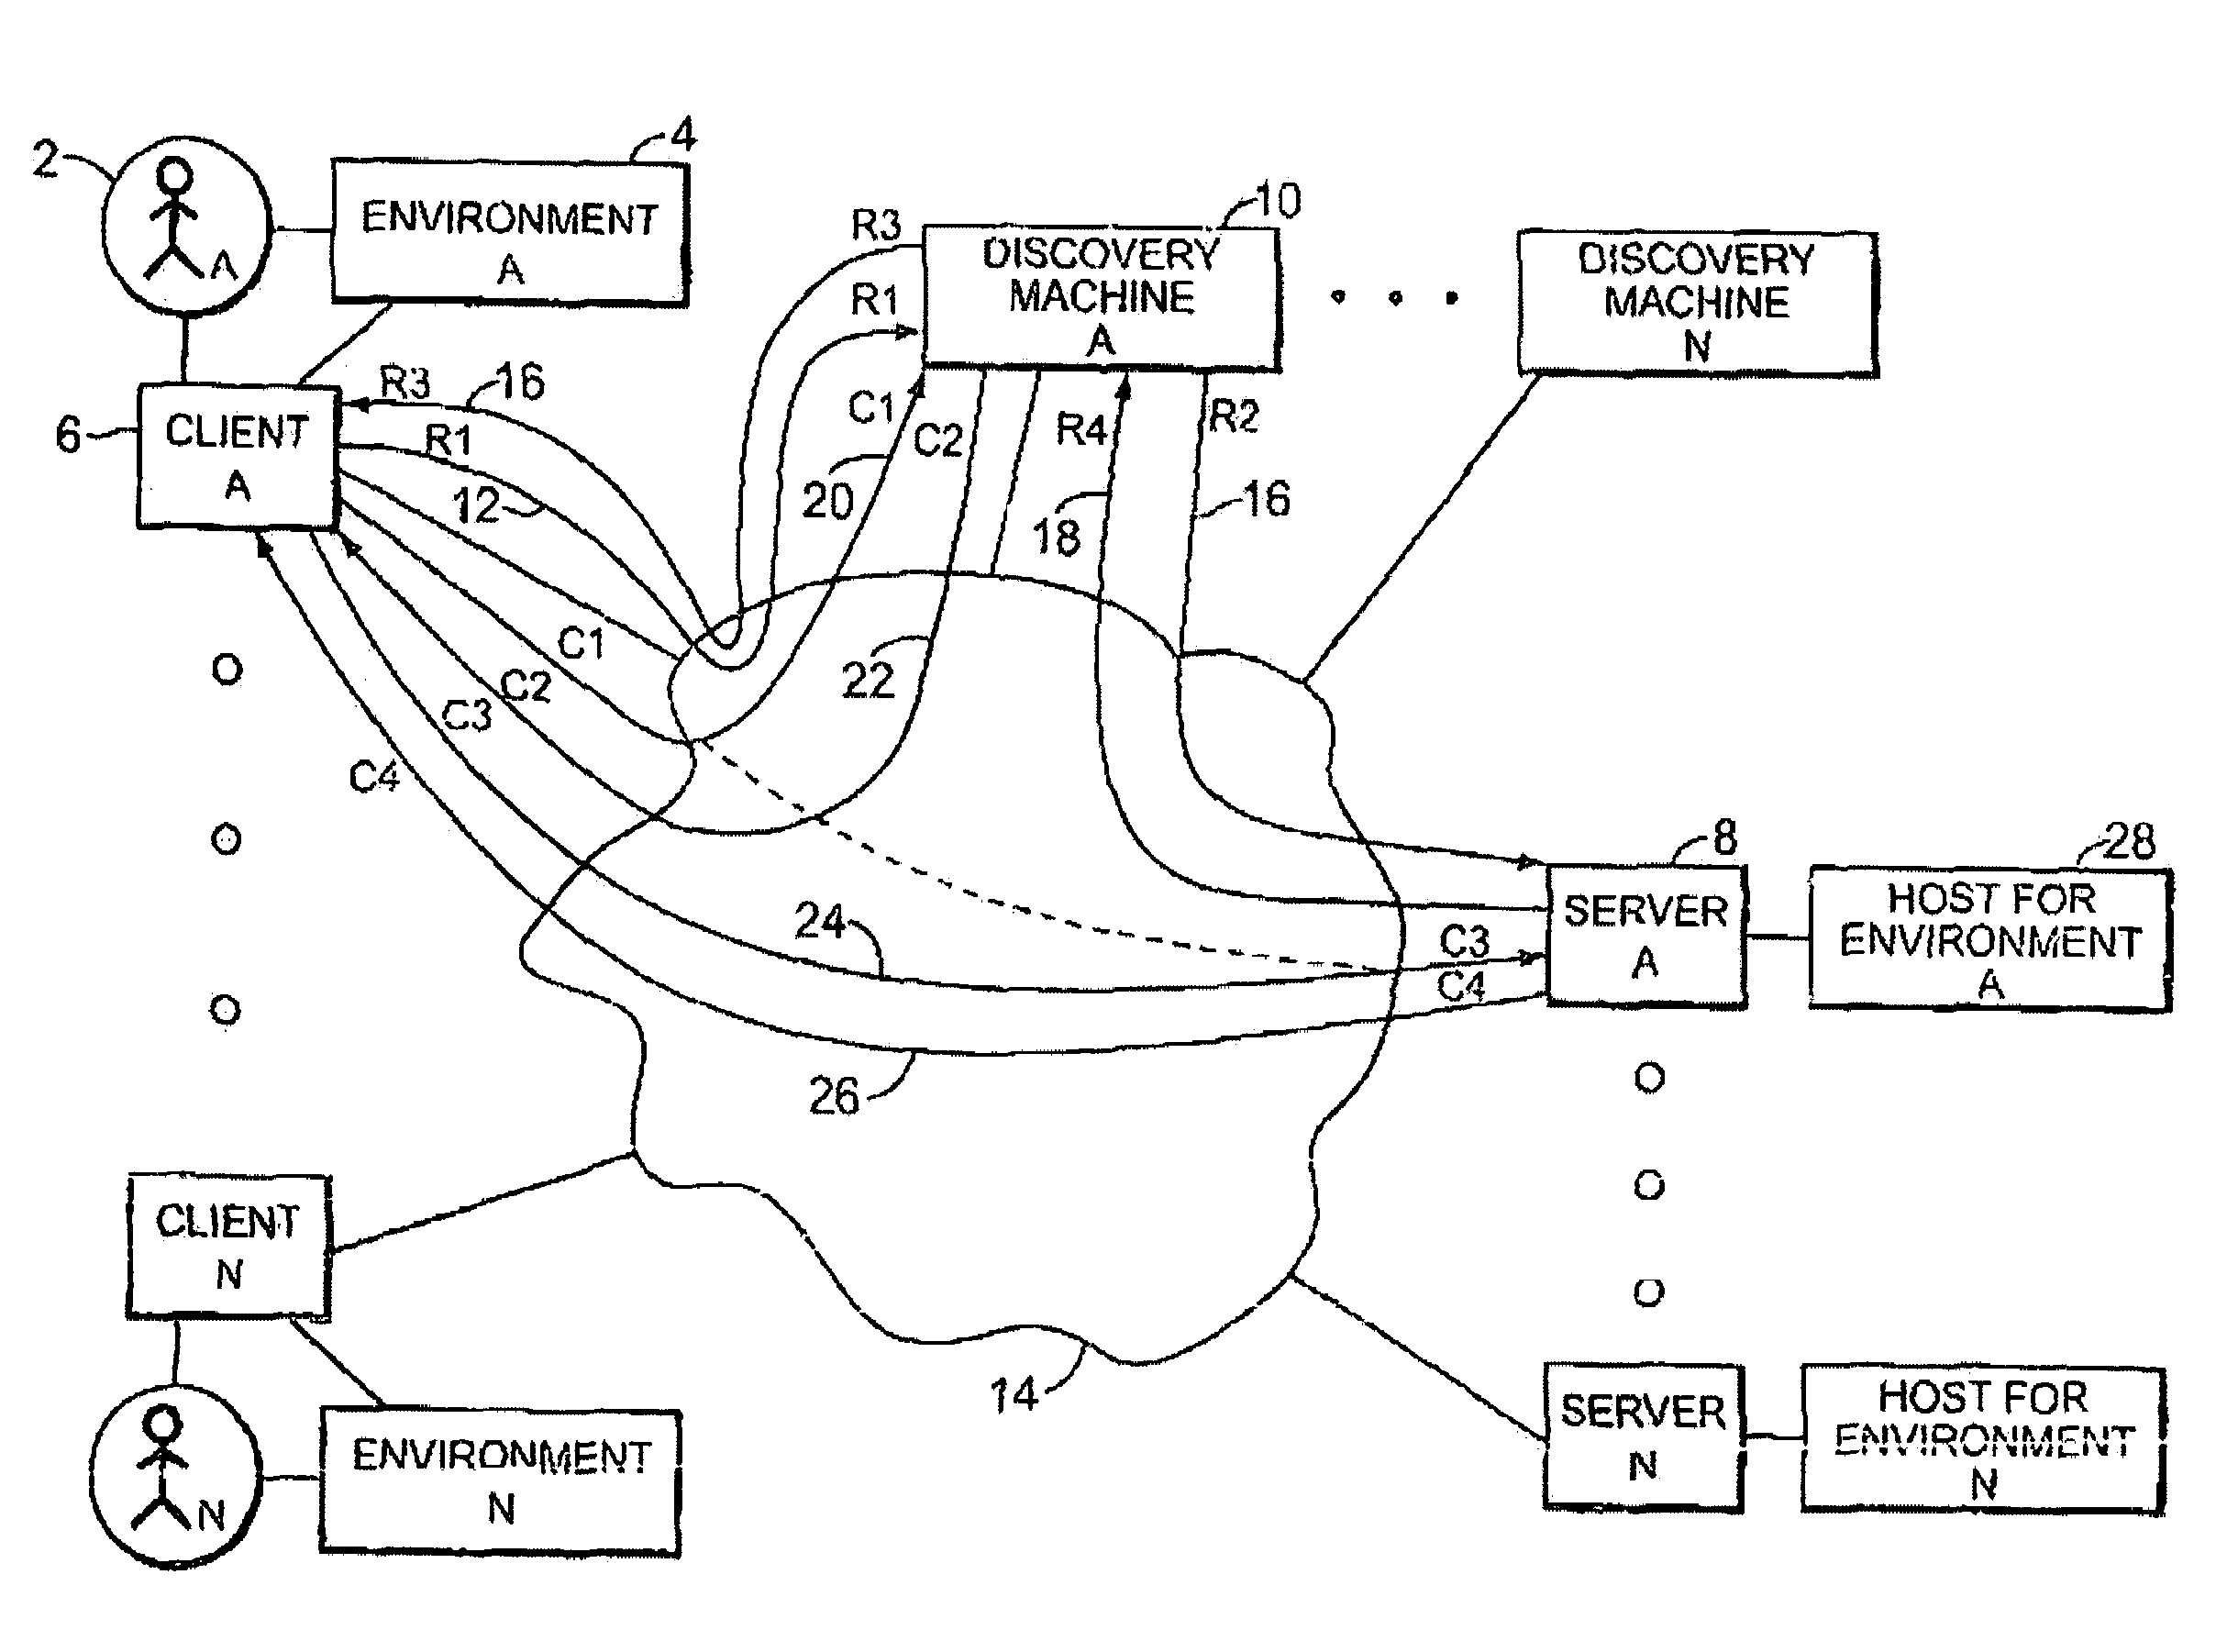 Managed information transmission of electronic items in a network environment